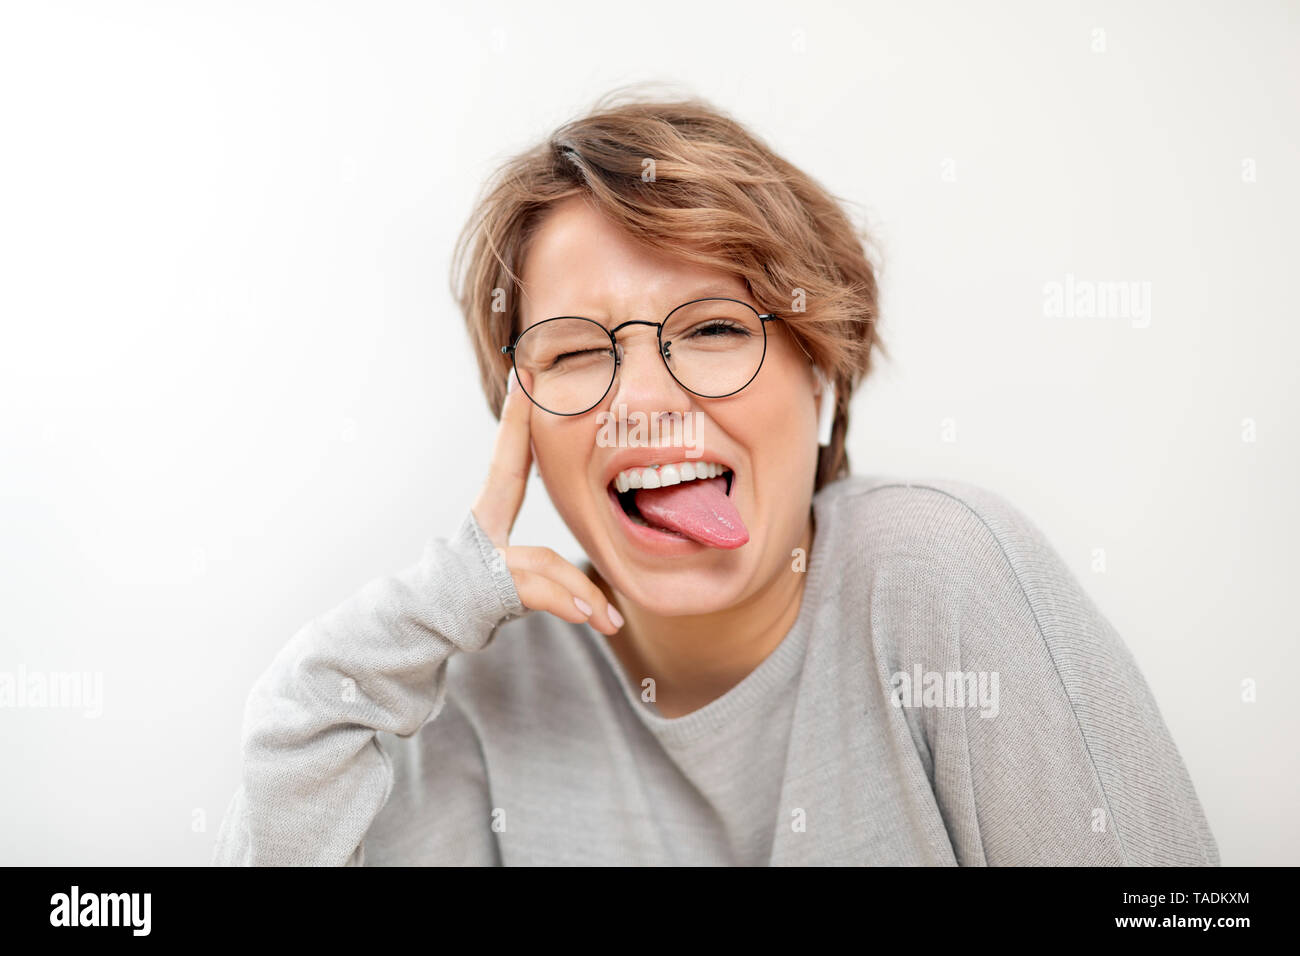 Portrait of young woman with wireless earphones pulling funny faces Stock Photo